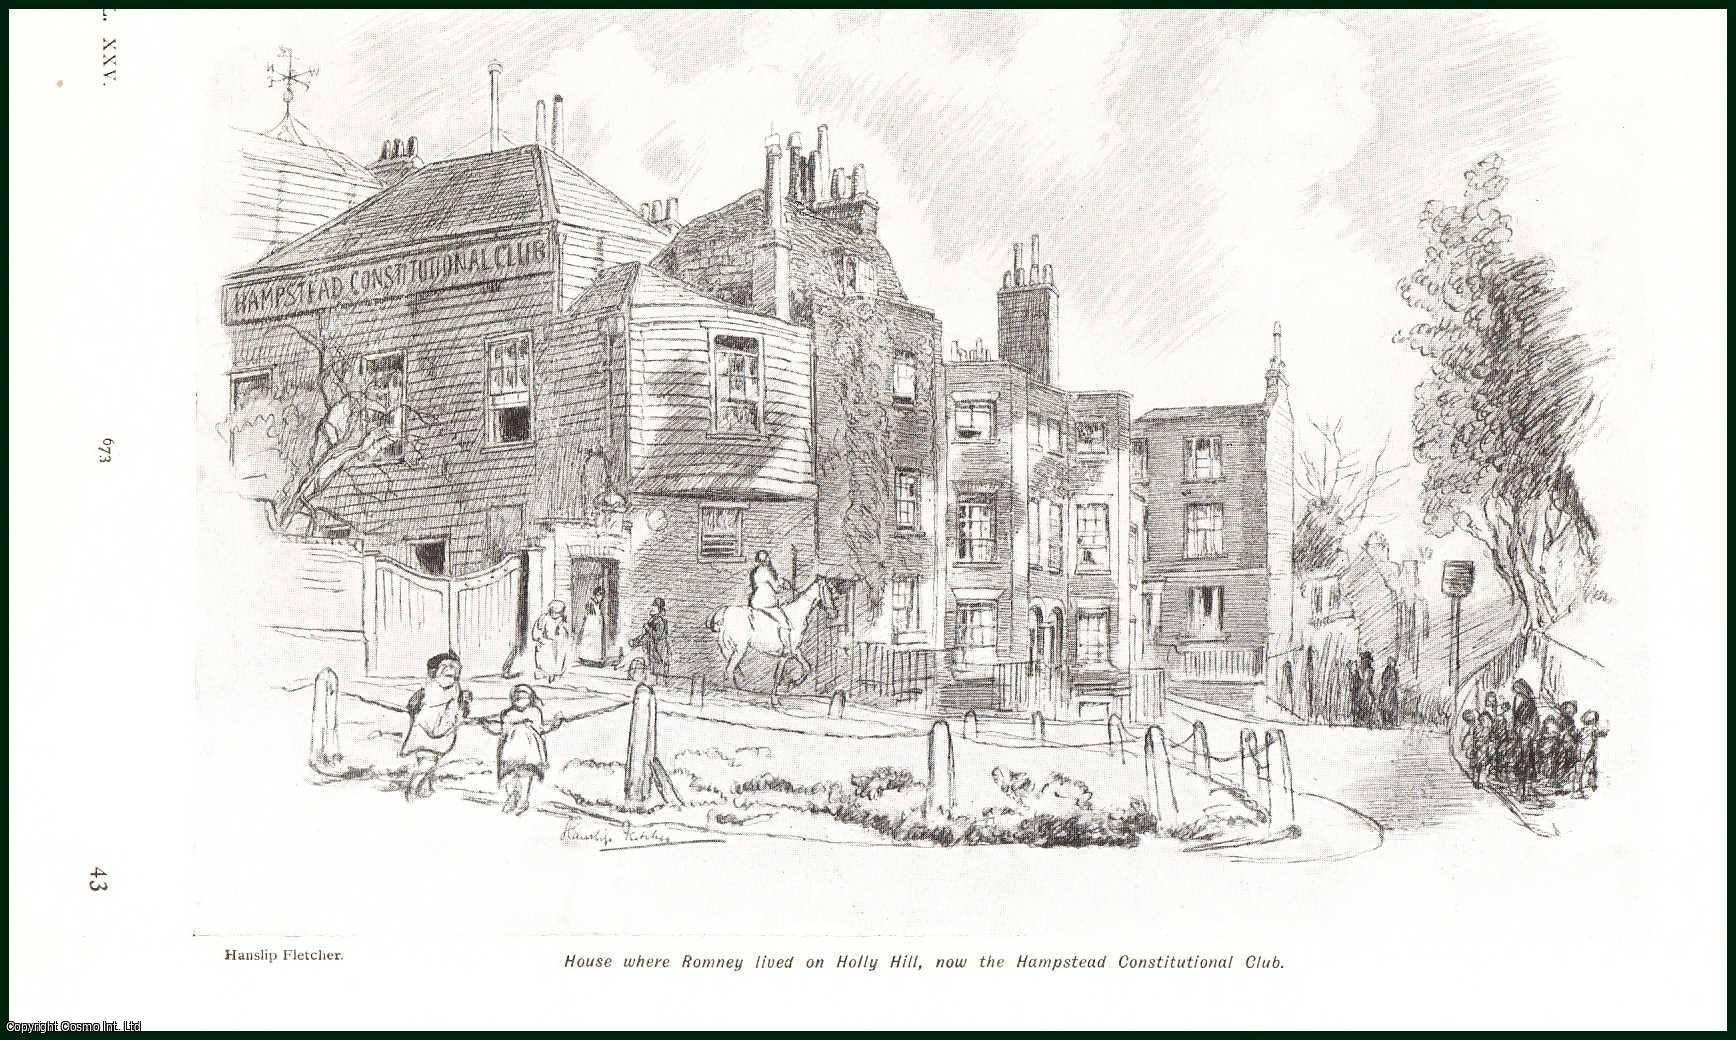 The Lady's Realm - A House where Romney Lived on Holly Hill ; One of The Oldest Houses in Church Row ; Frogmal House ; The Garden of The Spaniards Inn. A Series of Six Drawings by Hanslip Fletcher Illustrating Some of The Old Houses still Standing in this Historic Part of London, Hampstead : A Classic Suburb. An uncommon original article from the Lady's Realm, 1909.